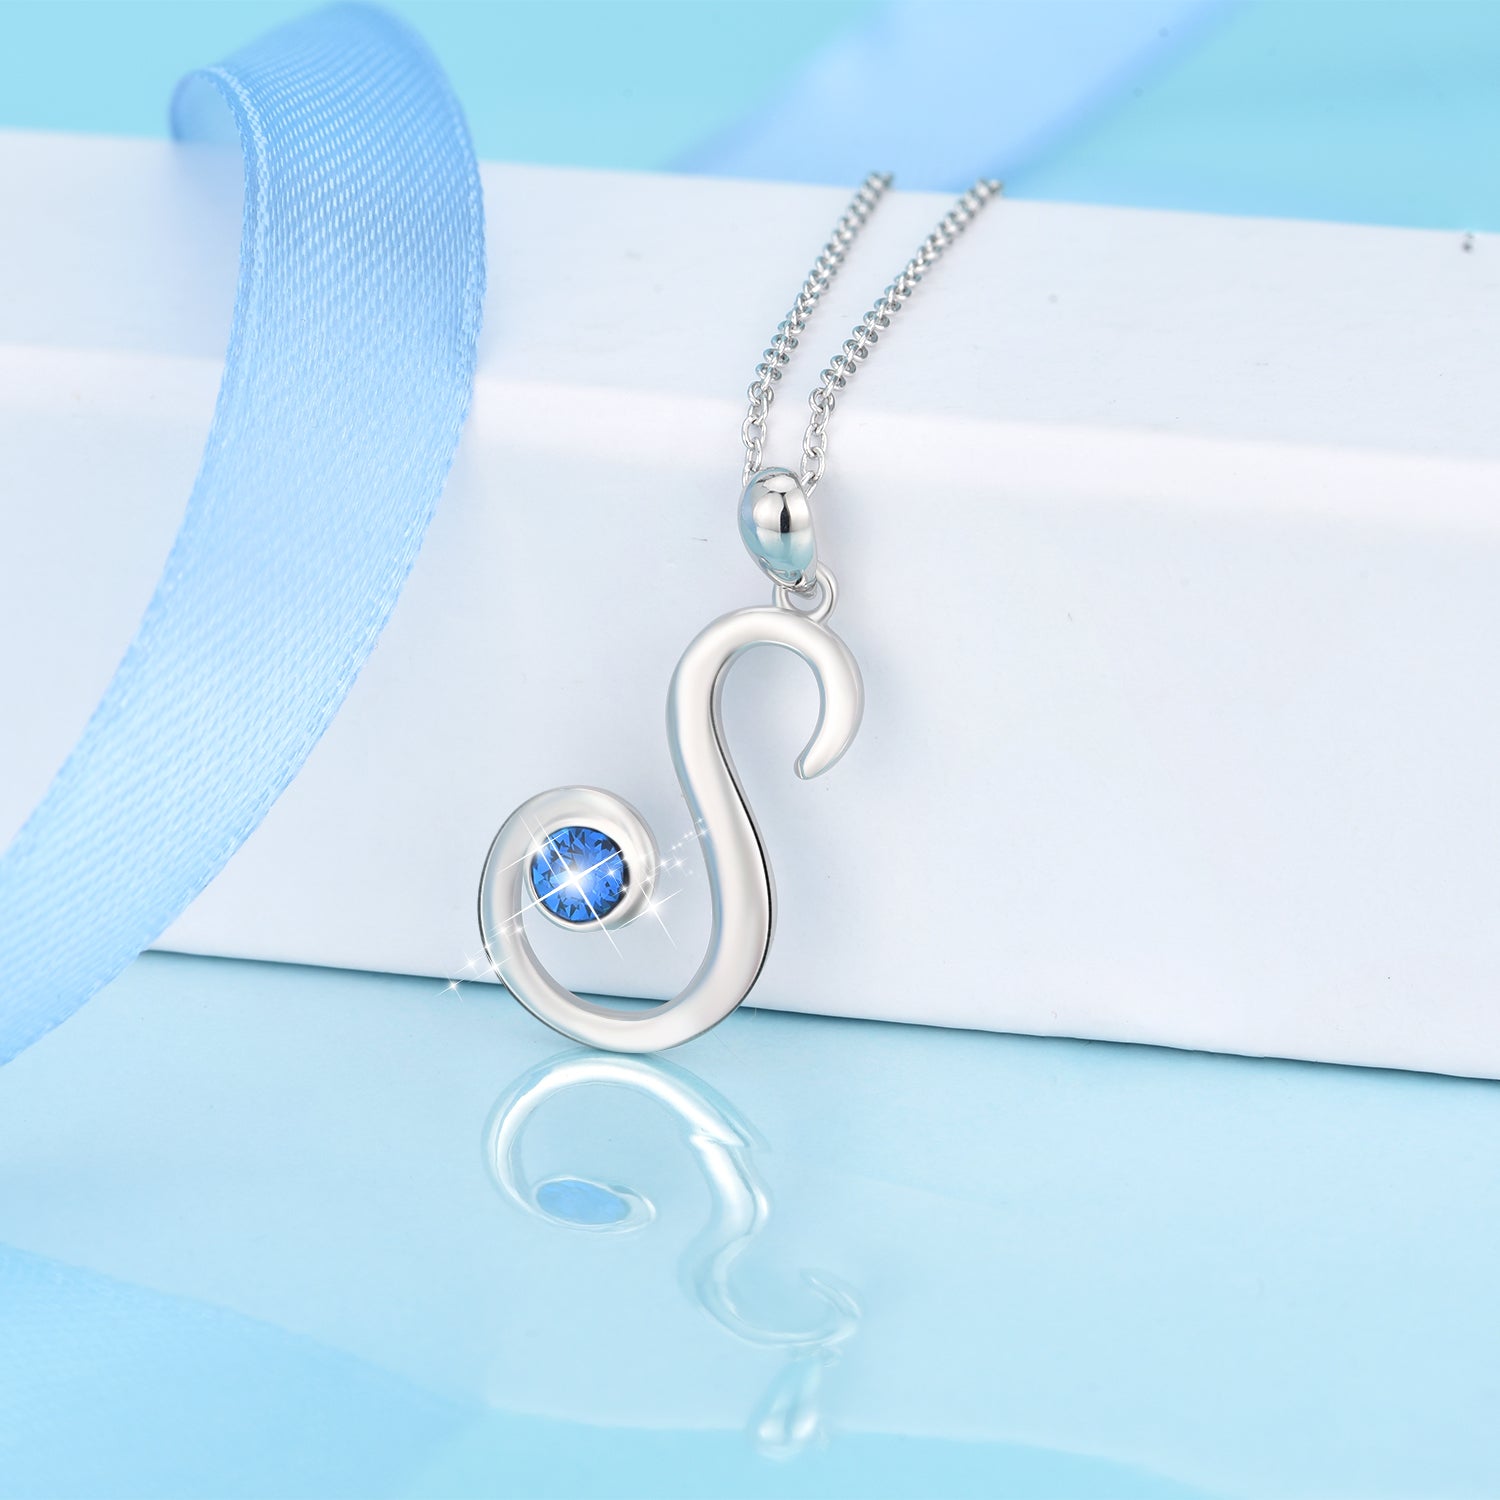 Manufacturer Charm 925 Sterling Silver Initial S Necklace for Girlfriend